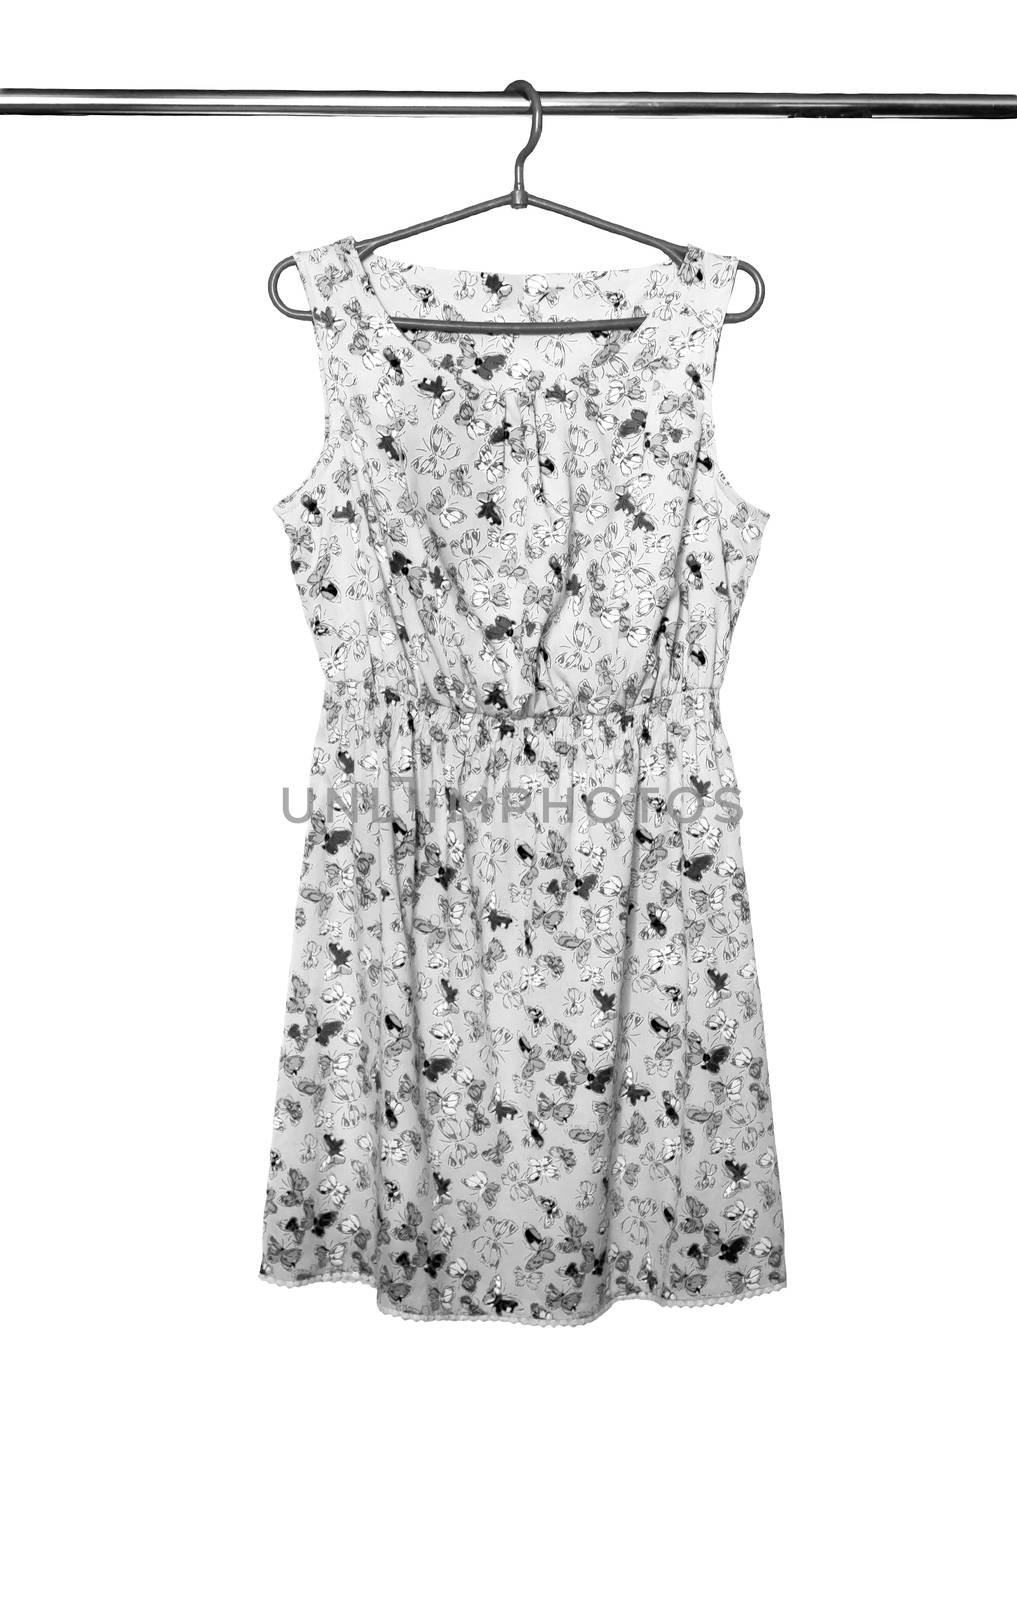 Summer dress with a butterfly pattern hanging on a hanger, isolated.